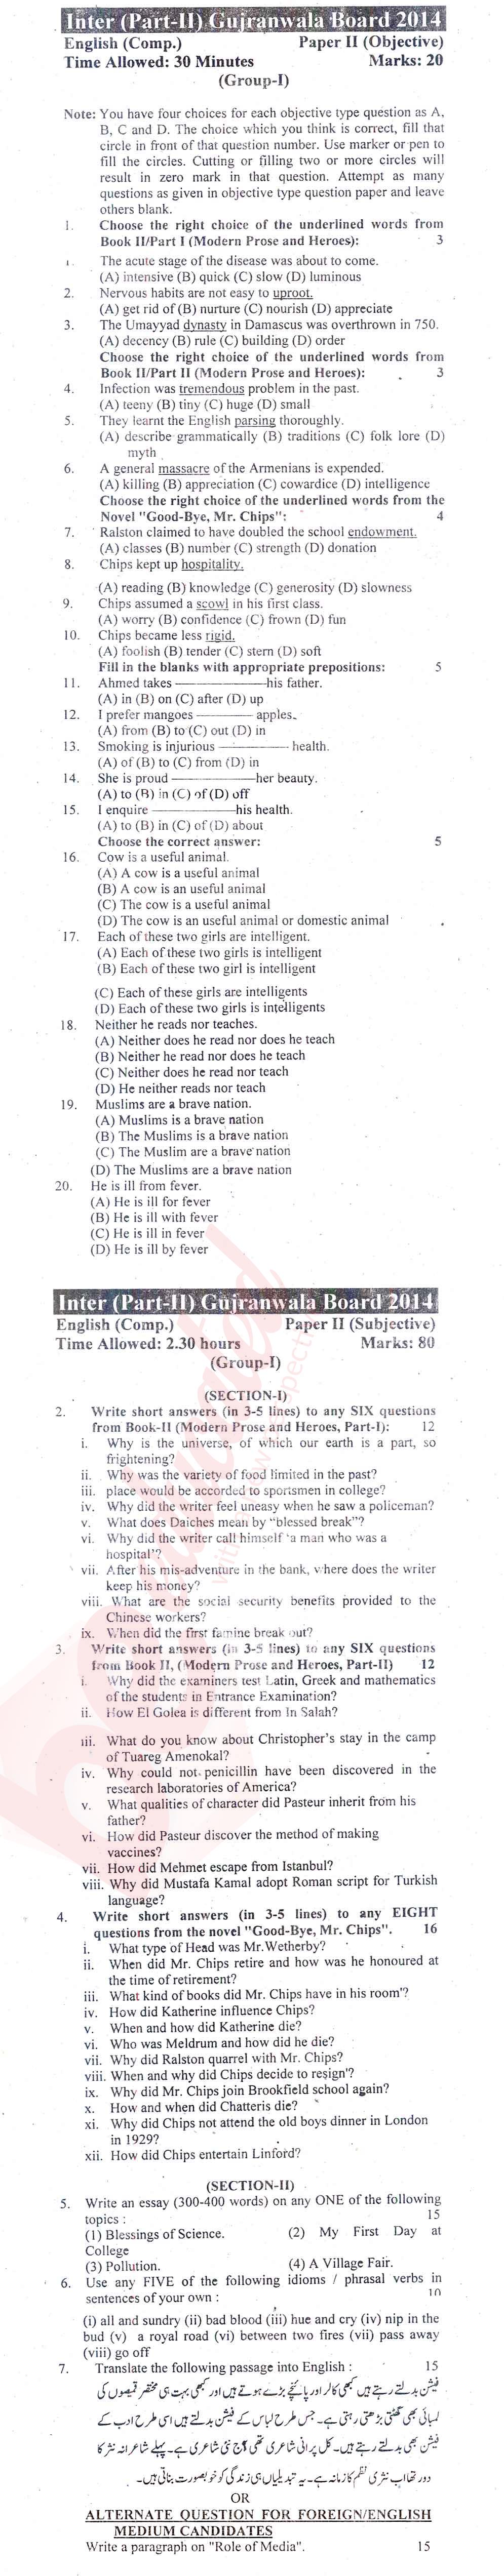 English 12th class Past Paper Group 1 BISE Gujranwala 2014